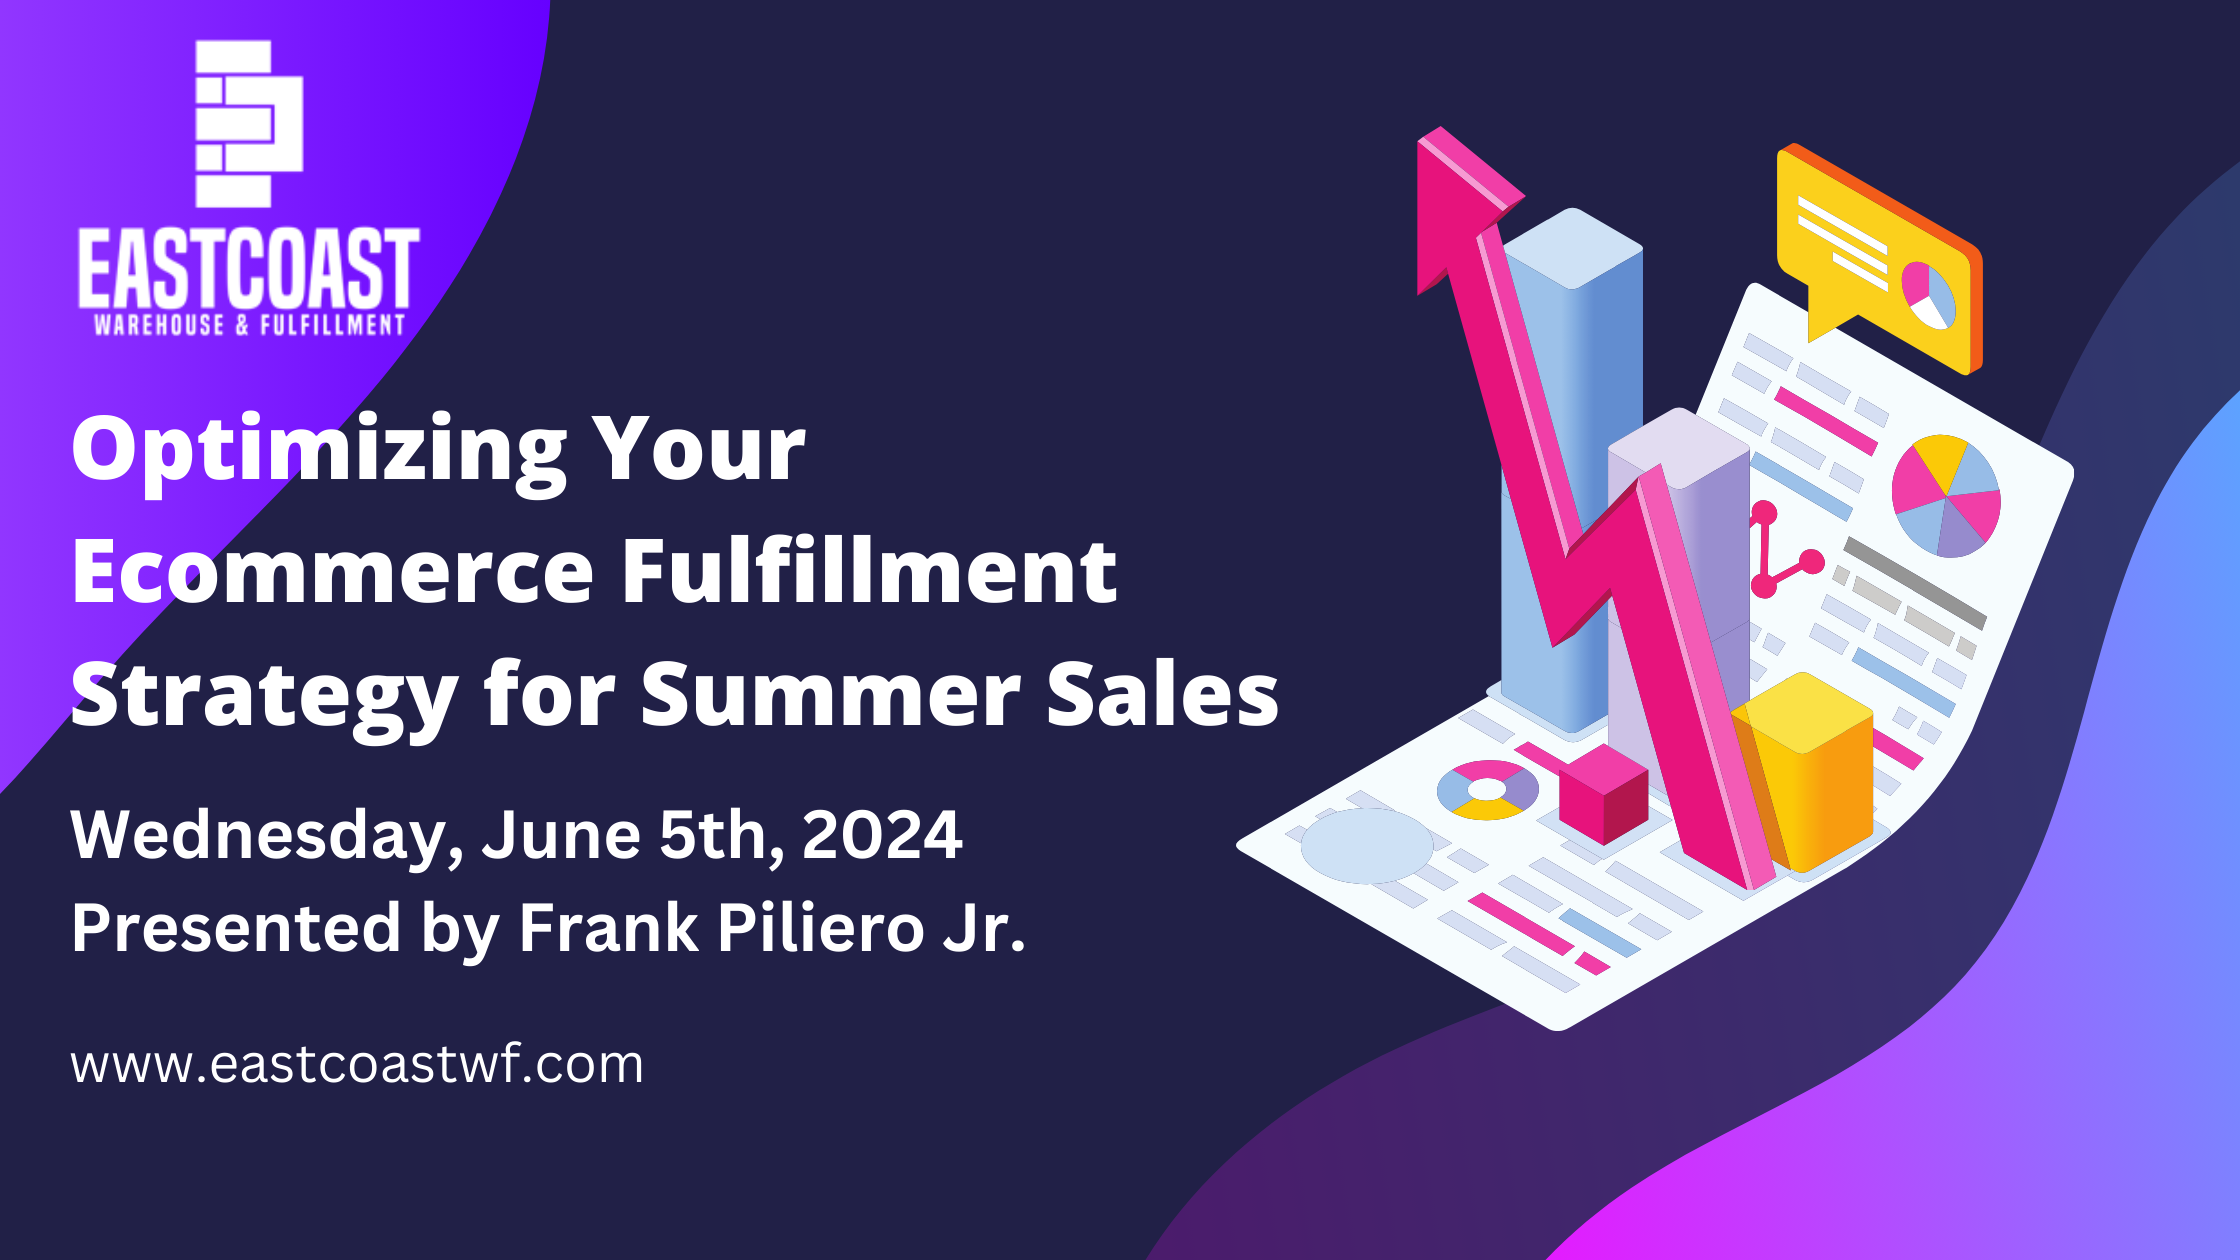 Optimizing Your Ecommerce Fulfillment Strategy for Summer Sales by East Coast Warehouse & Fulfillment